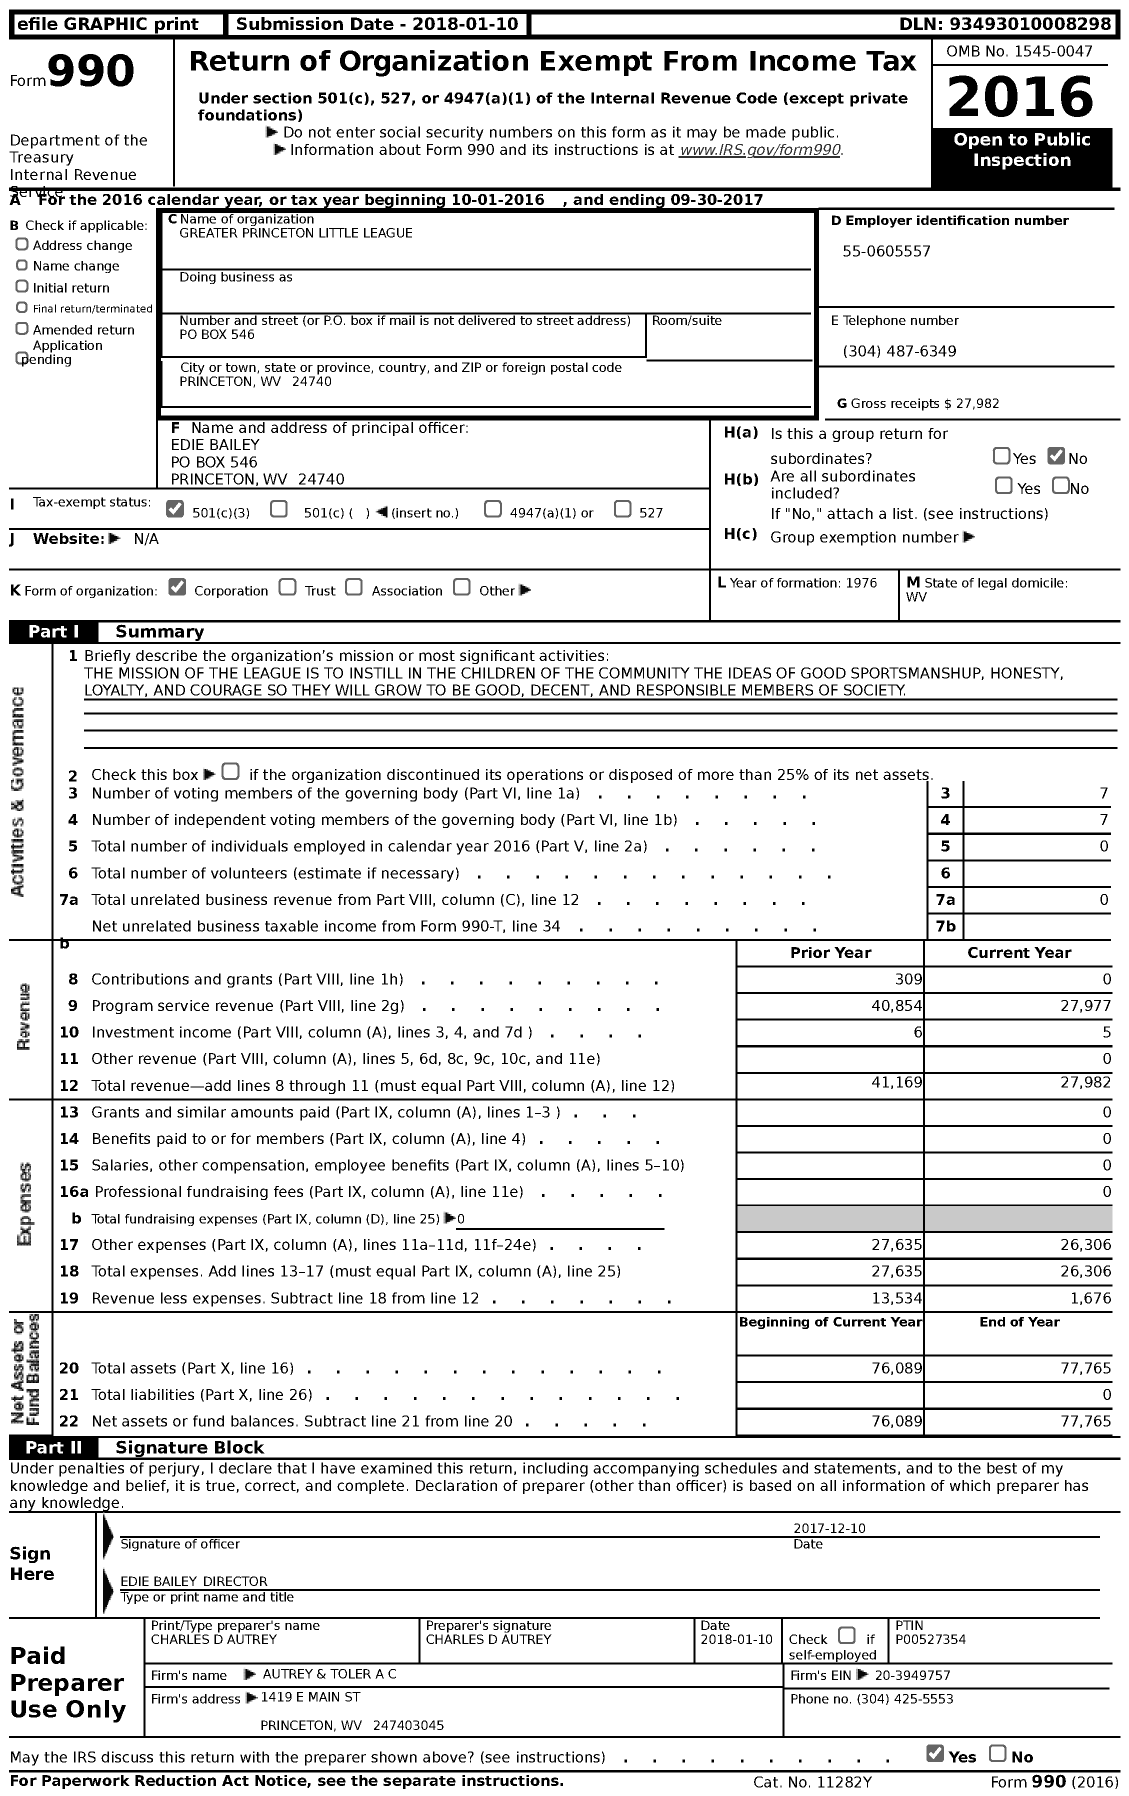 Image of first page of 2016 Form 990 for Little League Baseball - 3480419 Greater Princeton LL